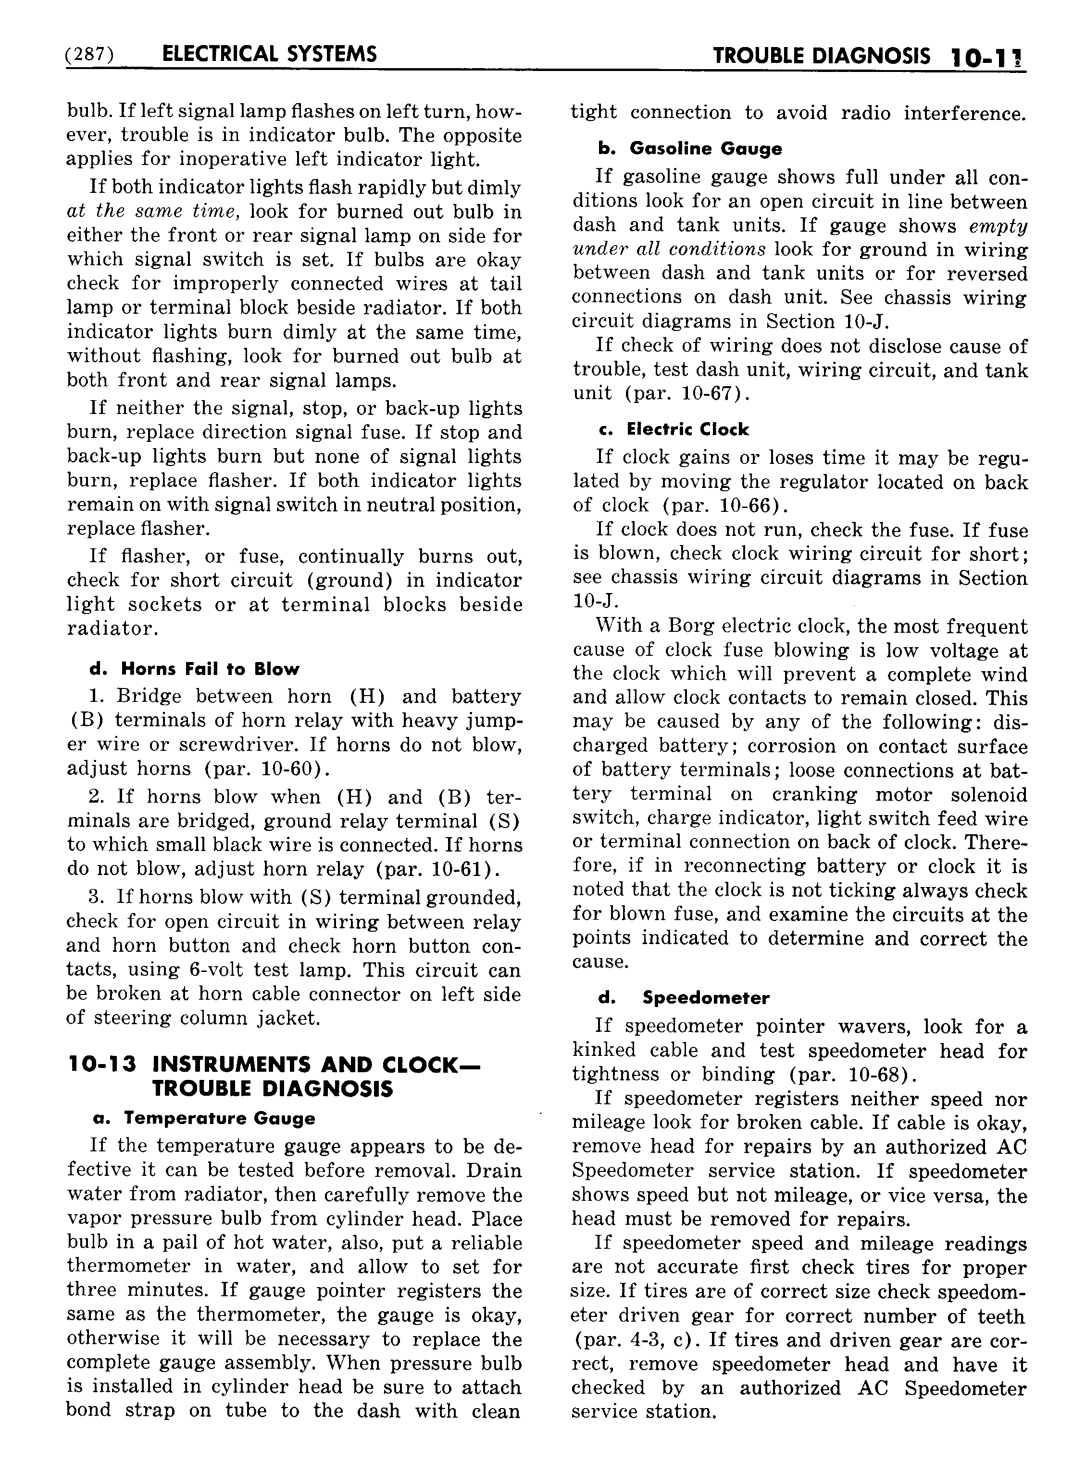 n_11 1948 Buick Shop Manual - Electrical Systems-011-011.jpg